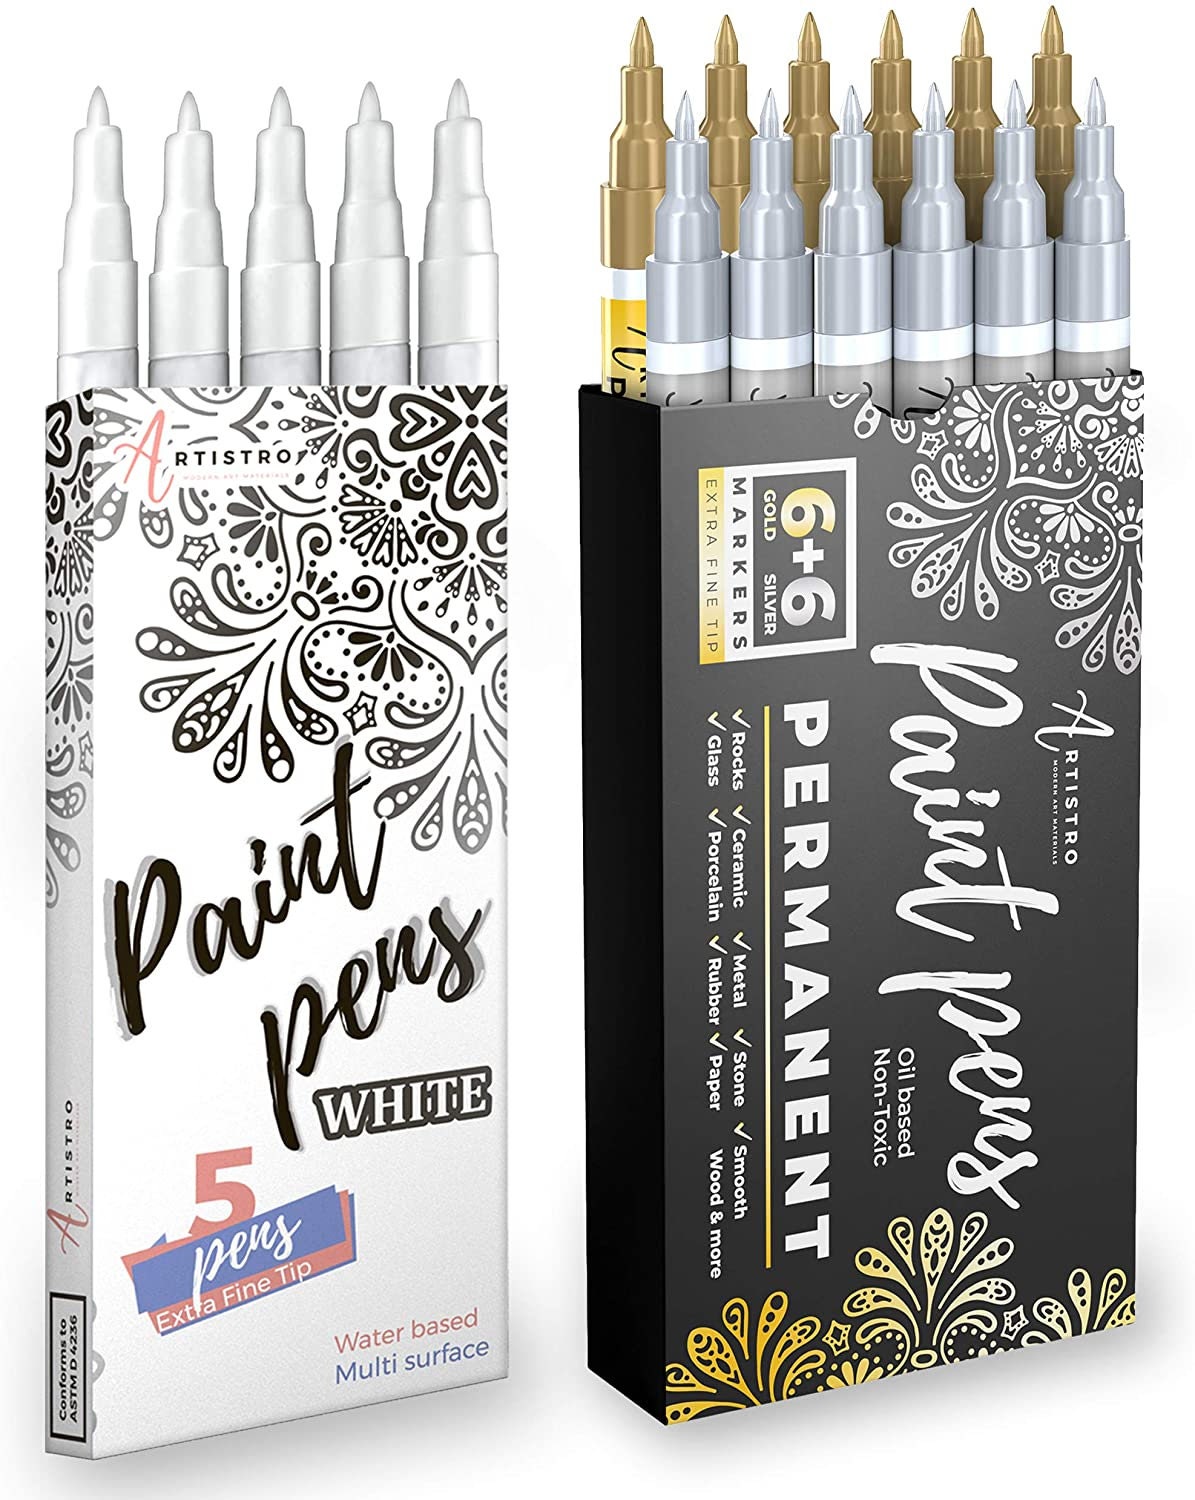 Paint Pens White Marker 6 Pack,0.7mm Acrylic White Permanent